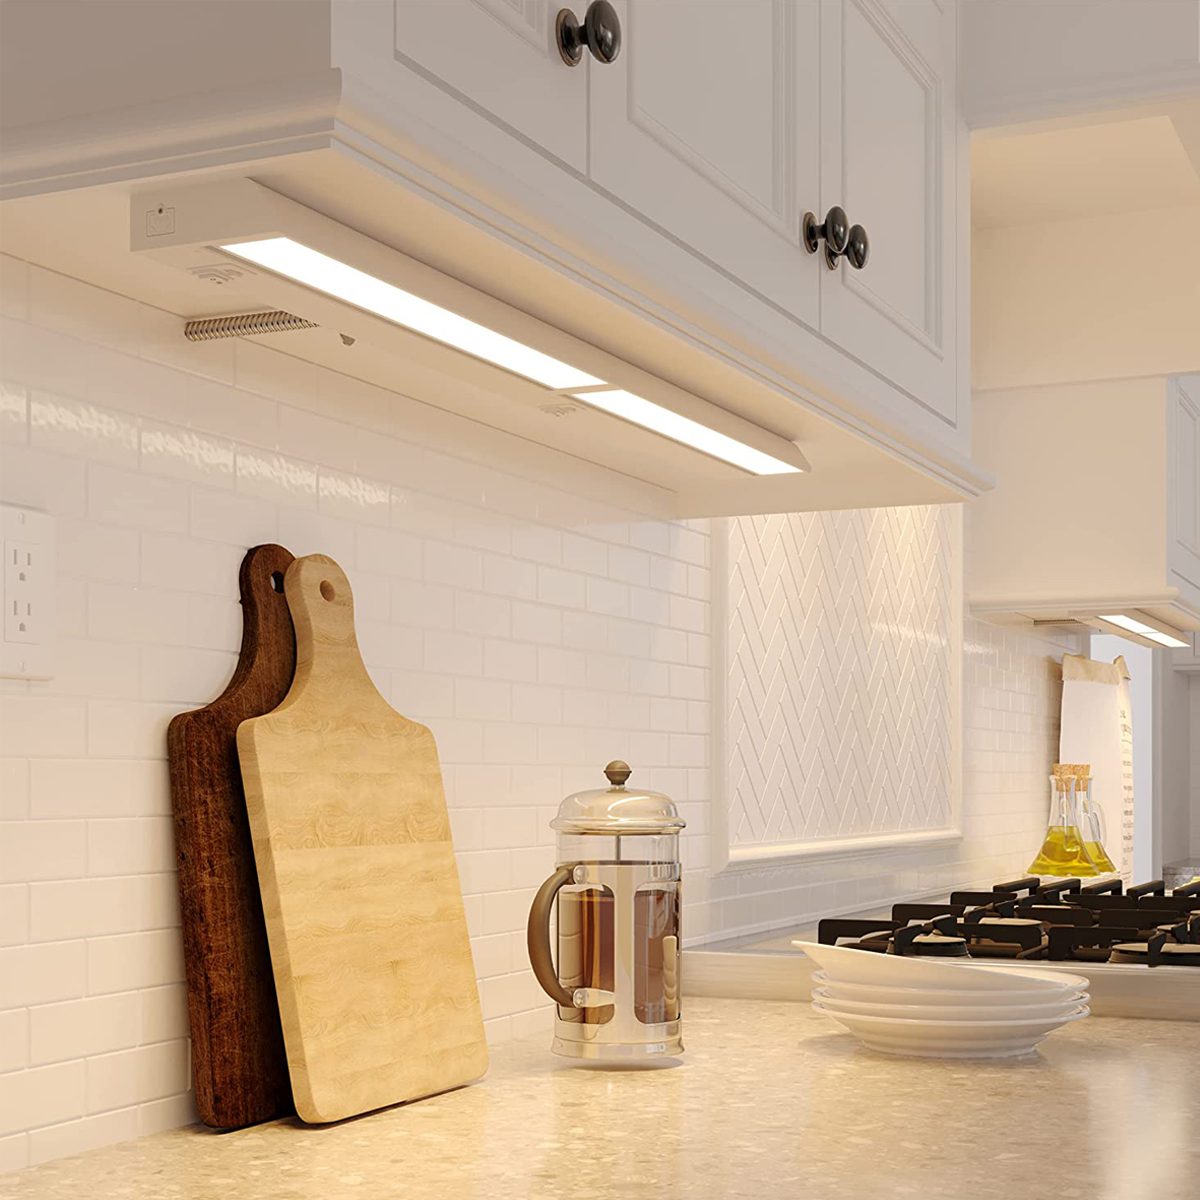 Illuminate Countertops with The 9 Best Under-Cabinet Lighting